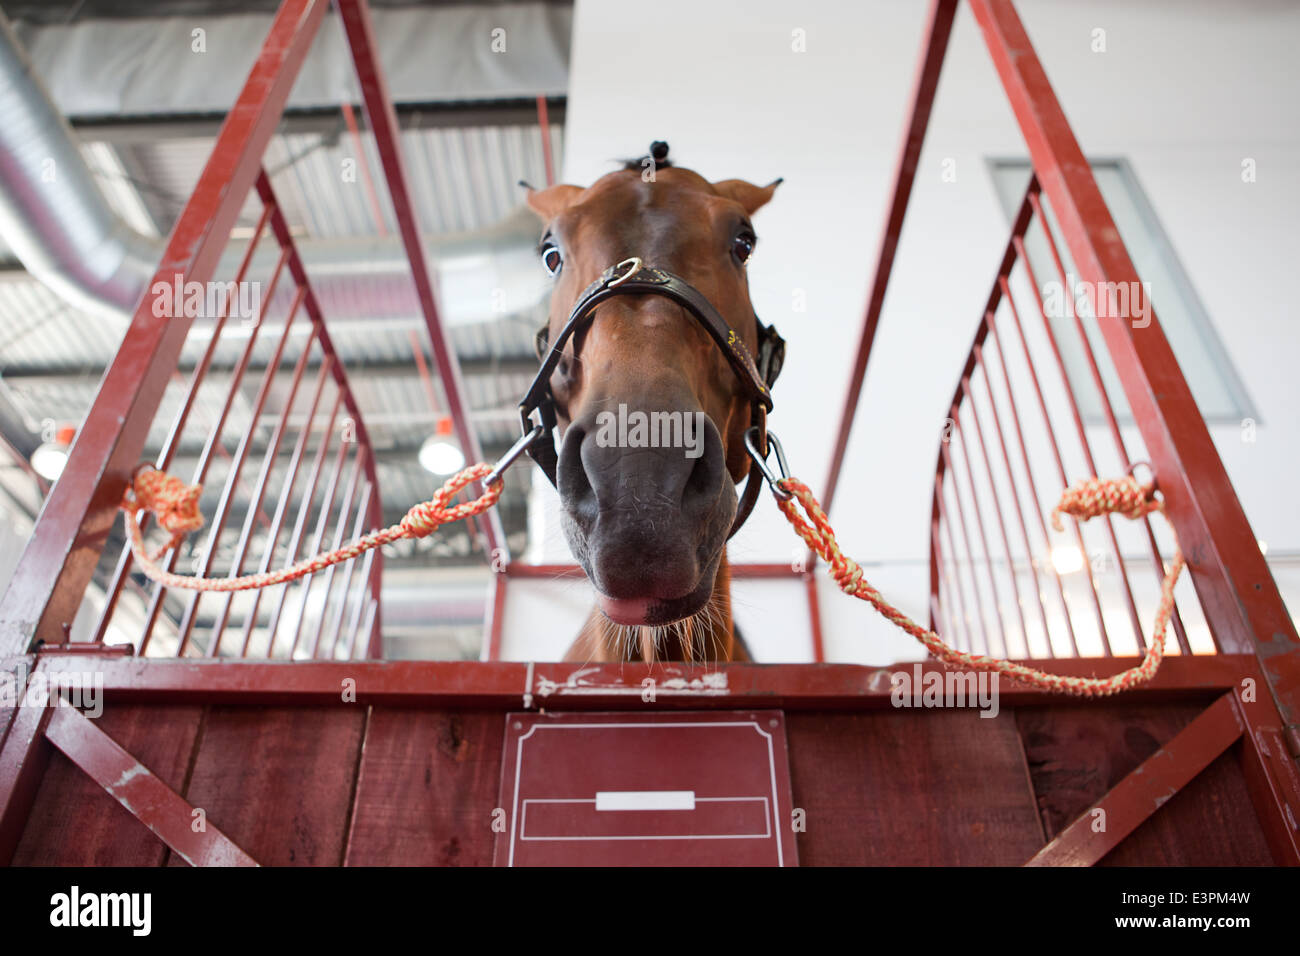 Horse portrait standing in manege box. Low angle shot Stock Photo